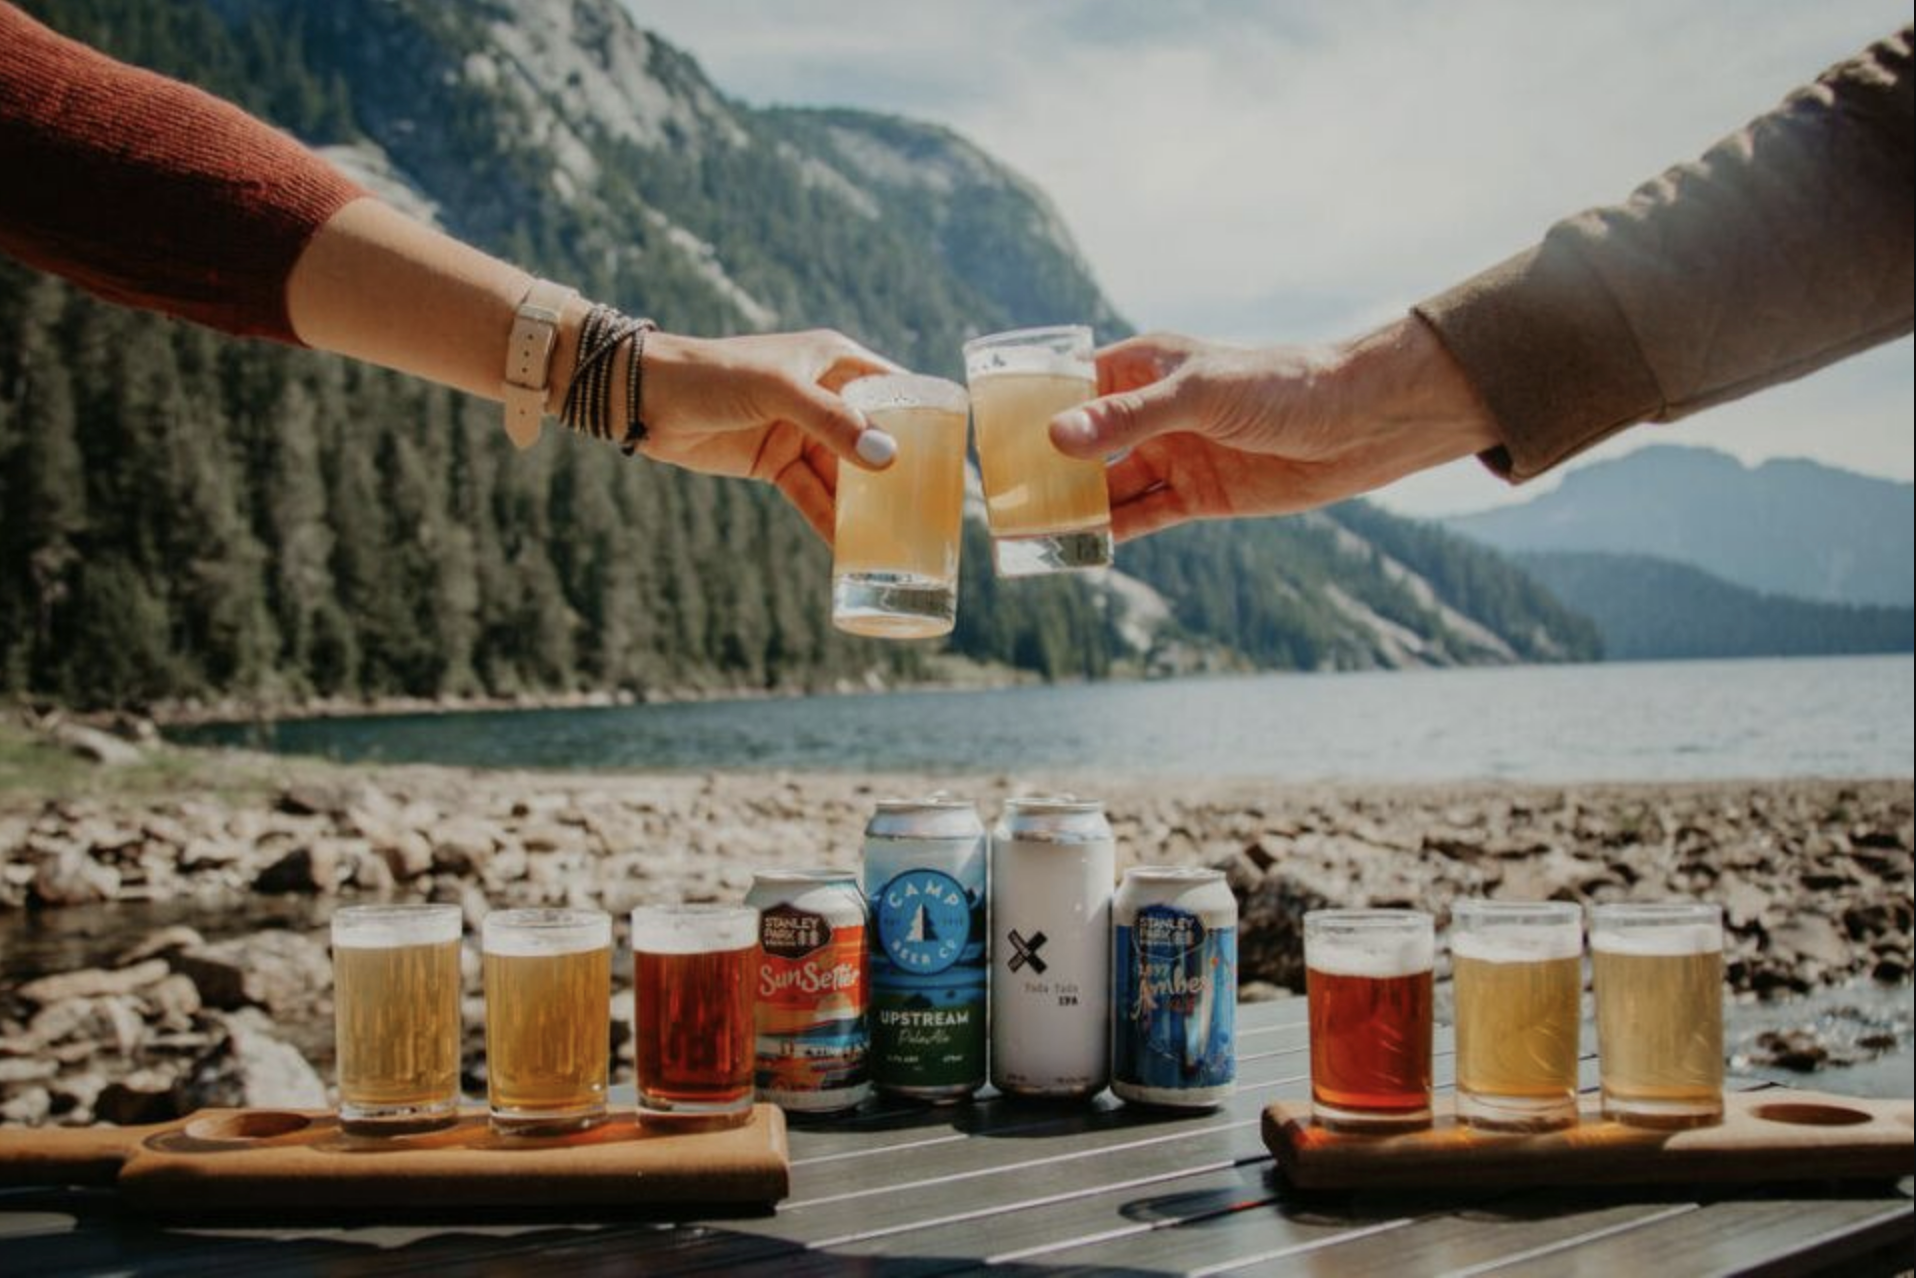 9. Vancouver Helicopter Tour with Craft Beer Tasting